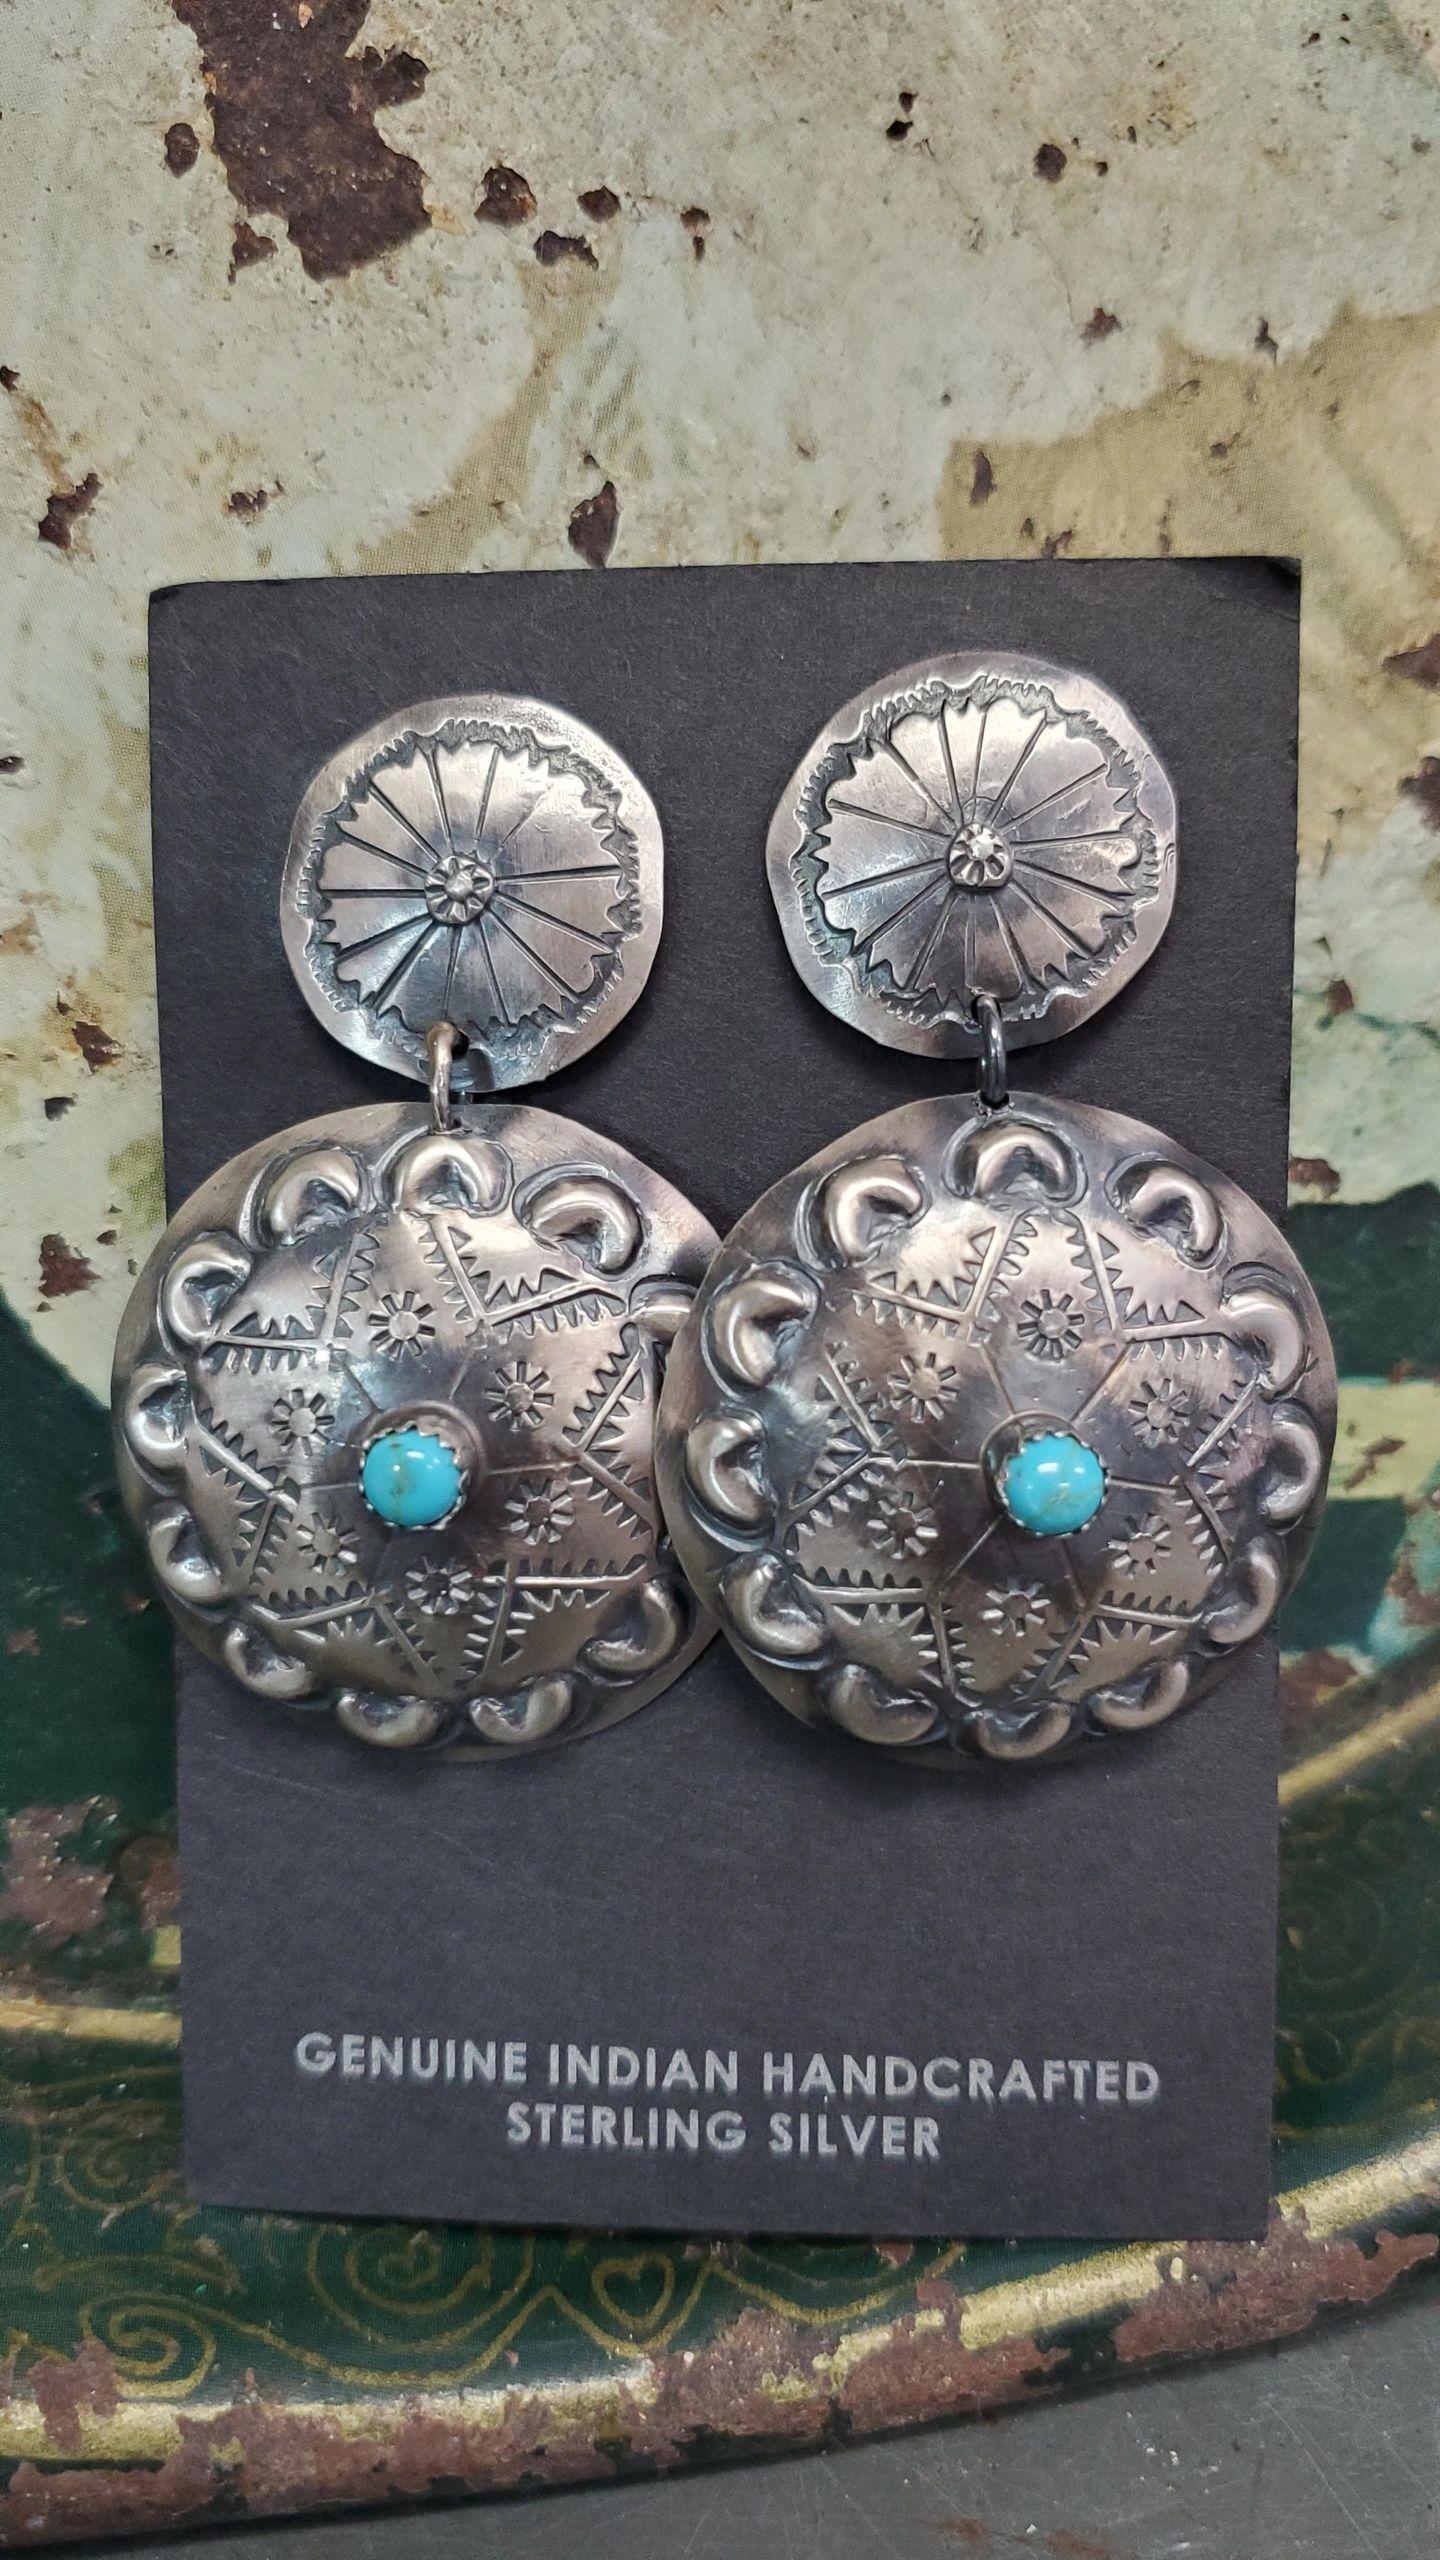 Star Turquoise & Silver Concho Earrings - Albuquerque Pawn Shop